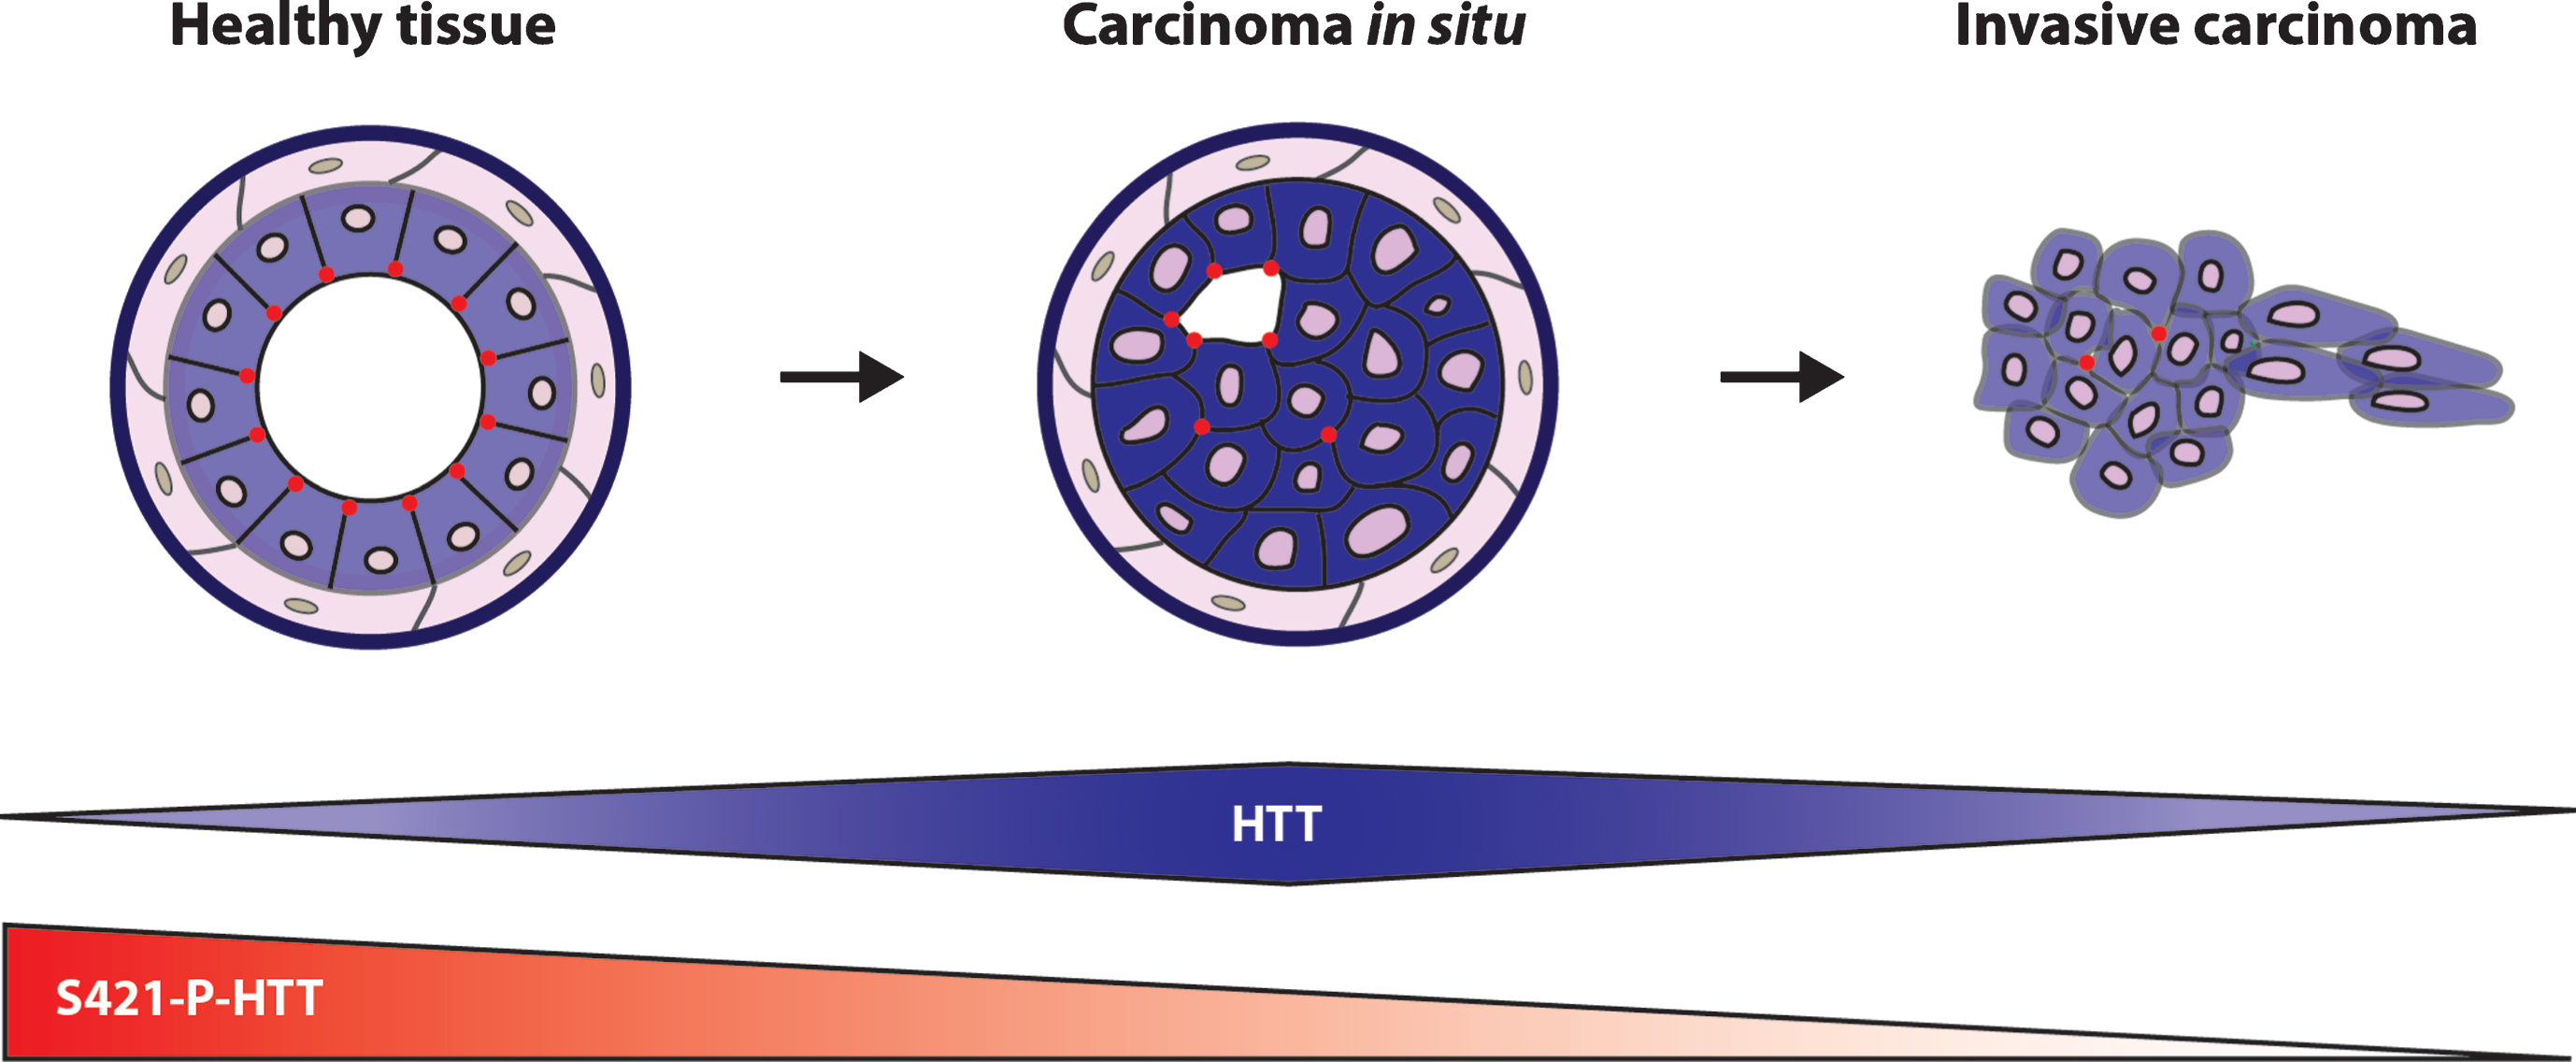 HTT and S421-P-HTT during tumor progression. Schematic representation of HTT cellular localization and S421-P-HTT during mammary gland tumor progression. (from [30]).